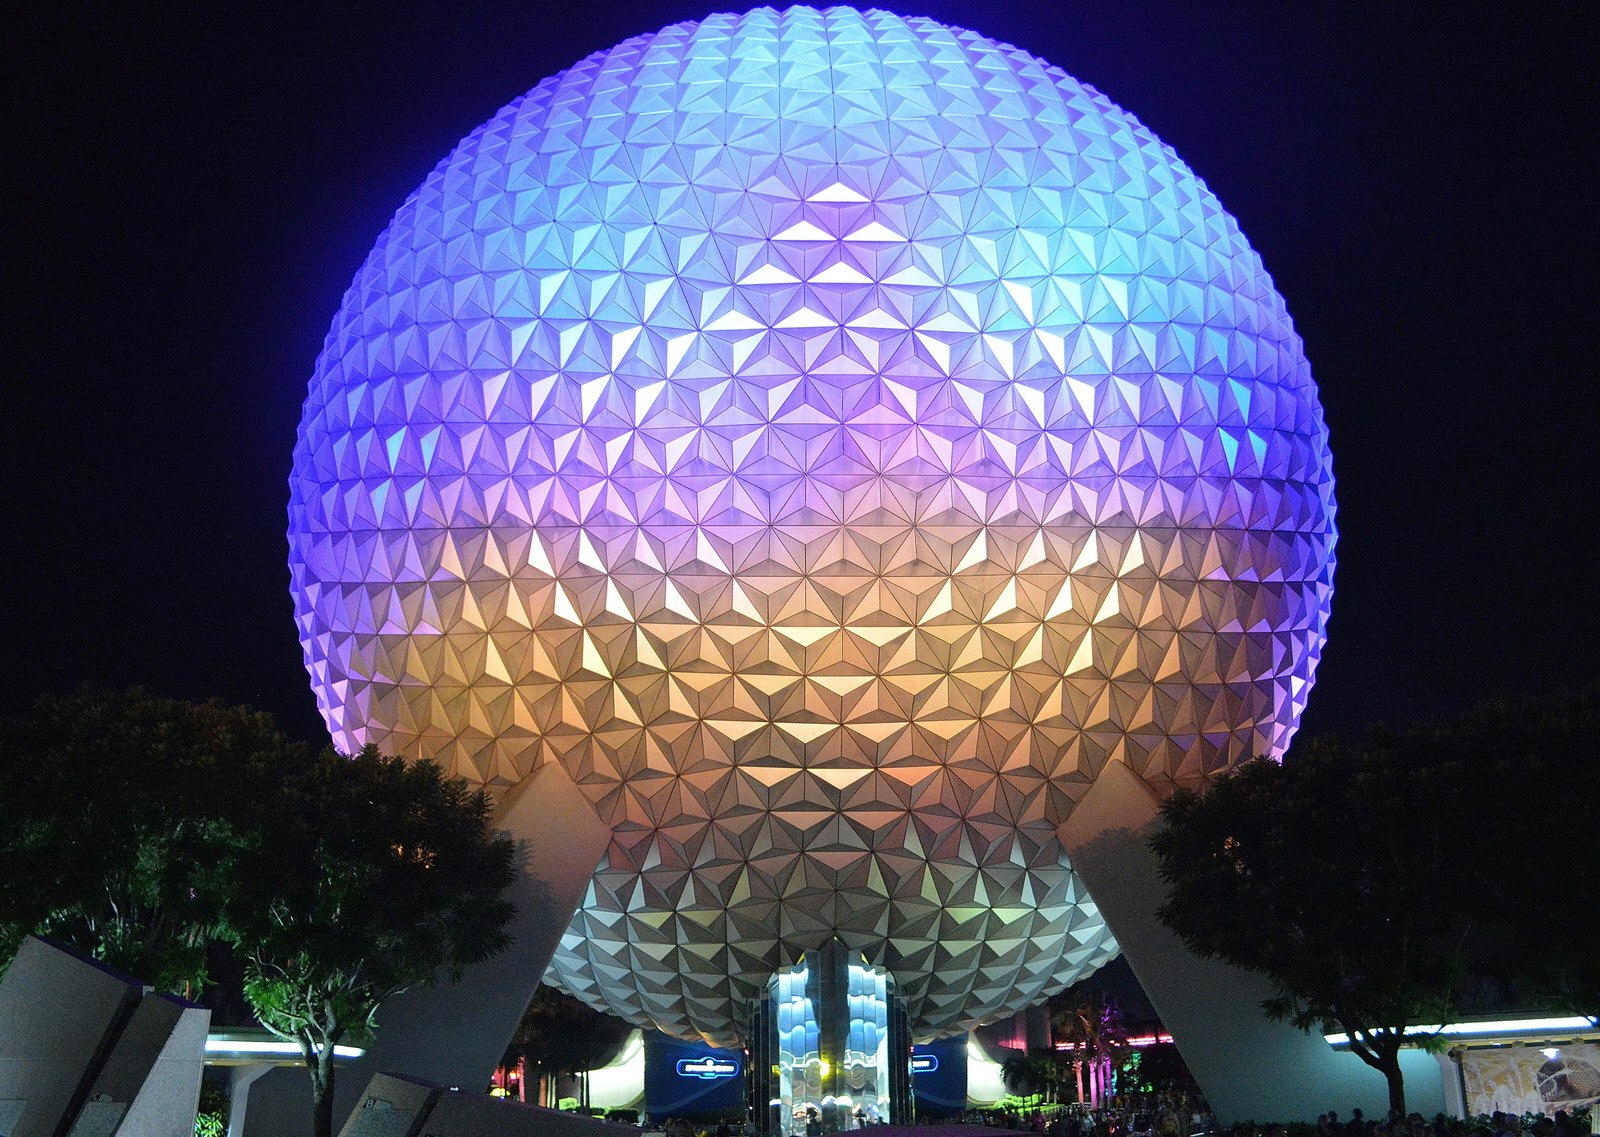 View of the illuminated, imposing sphere located at the entrance of Epcot Center, Florida, at night time